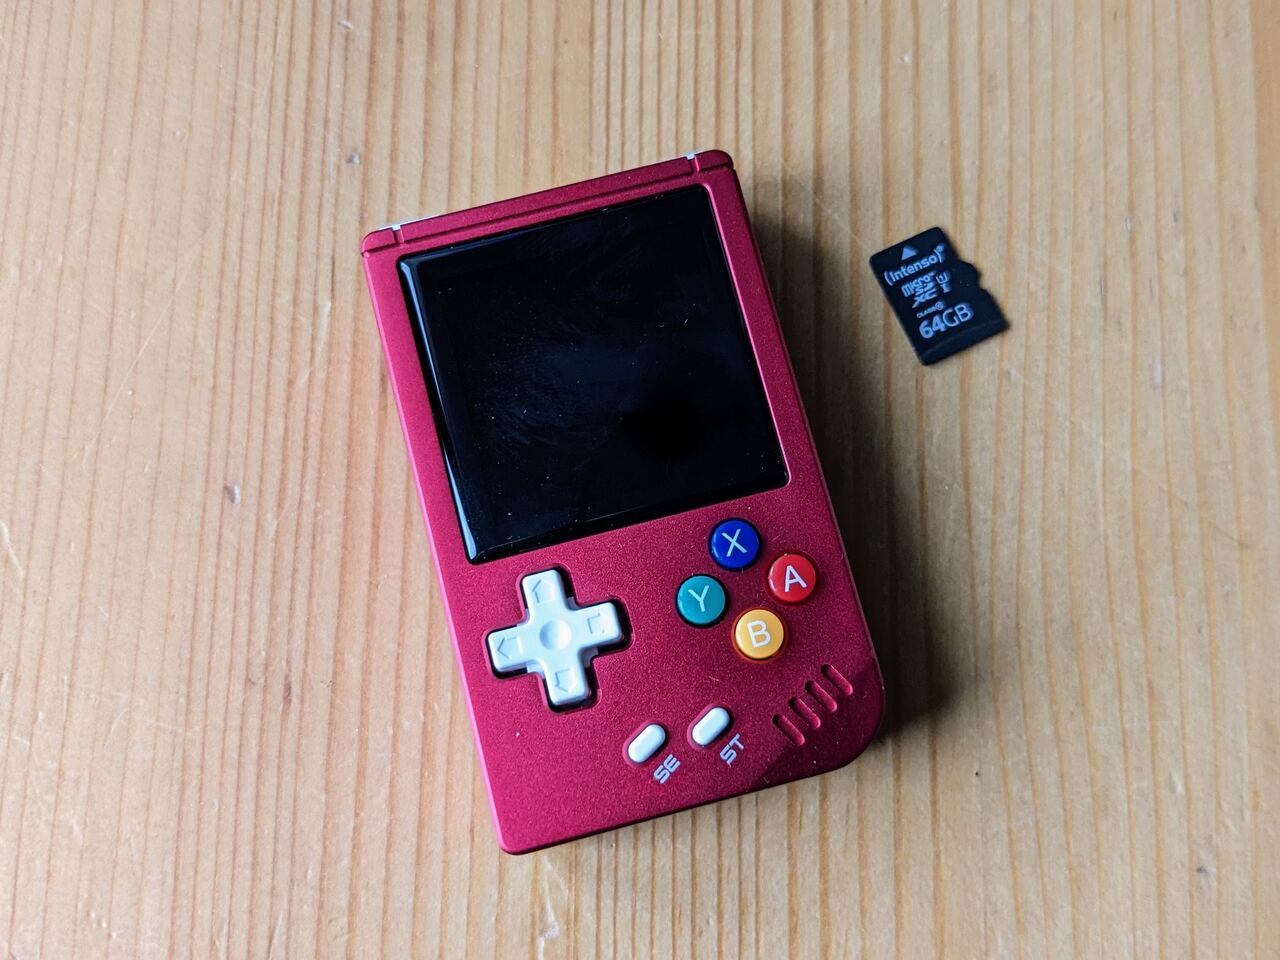 Anbernic RG Nano handheld console (In pinkish red) next to a Micro SD card to show how tiny it is - It's about 4cm wide and 7cm long)